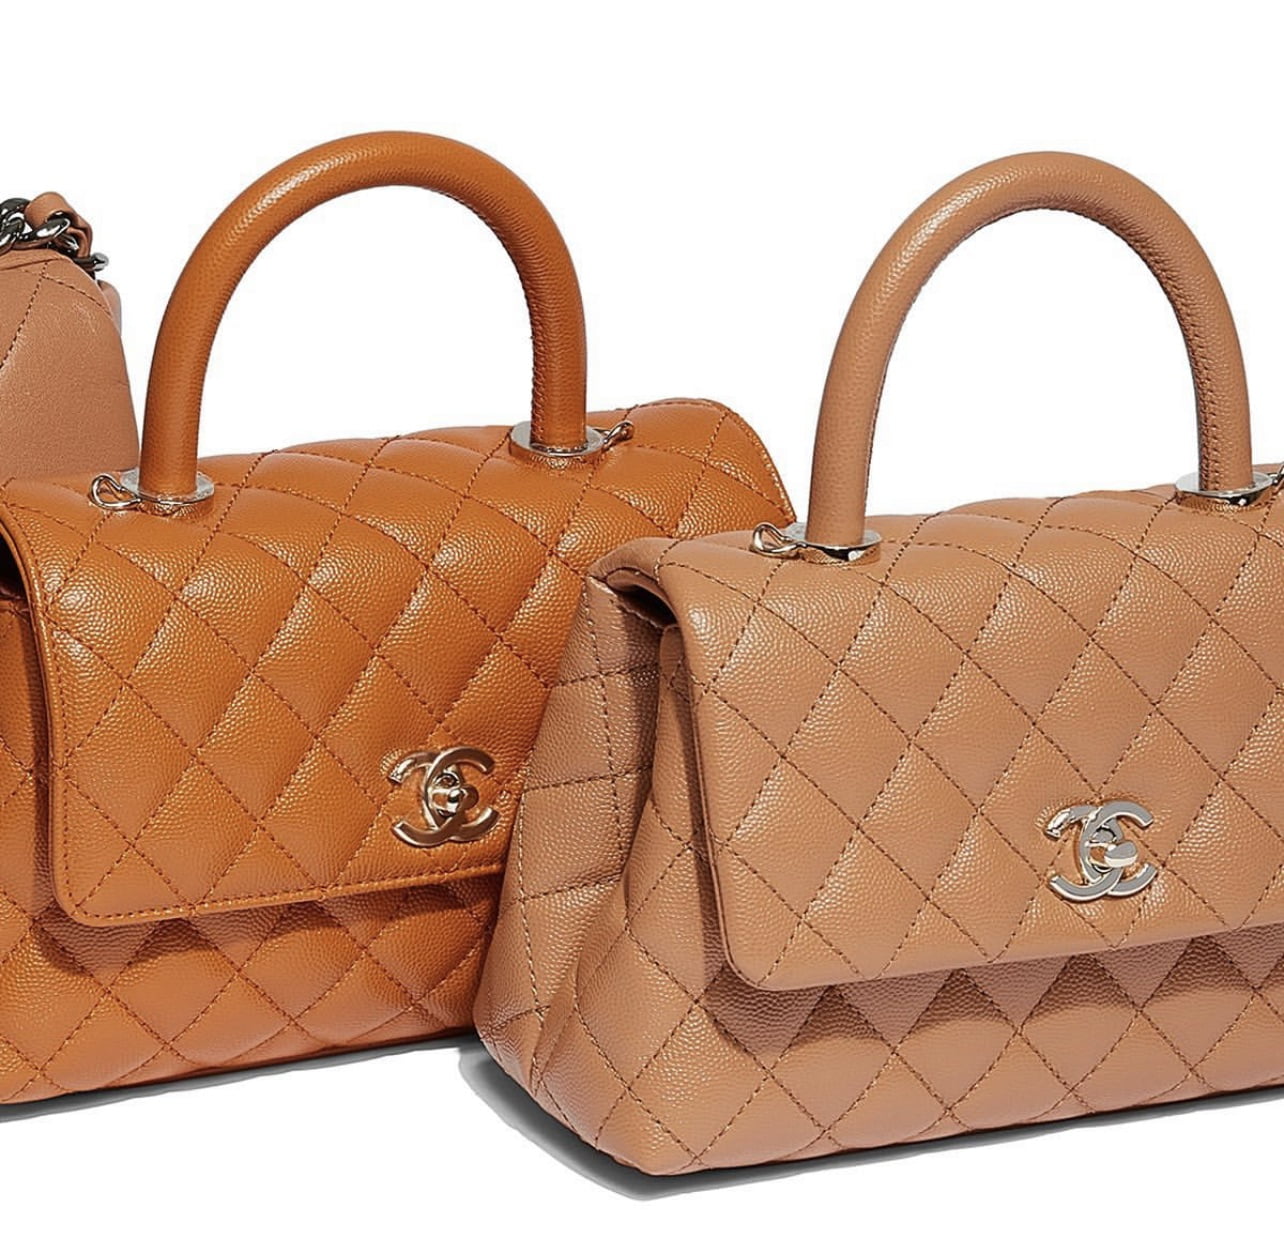 Spend $1,500 or Save for Bags at $3,000 - PurseBop